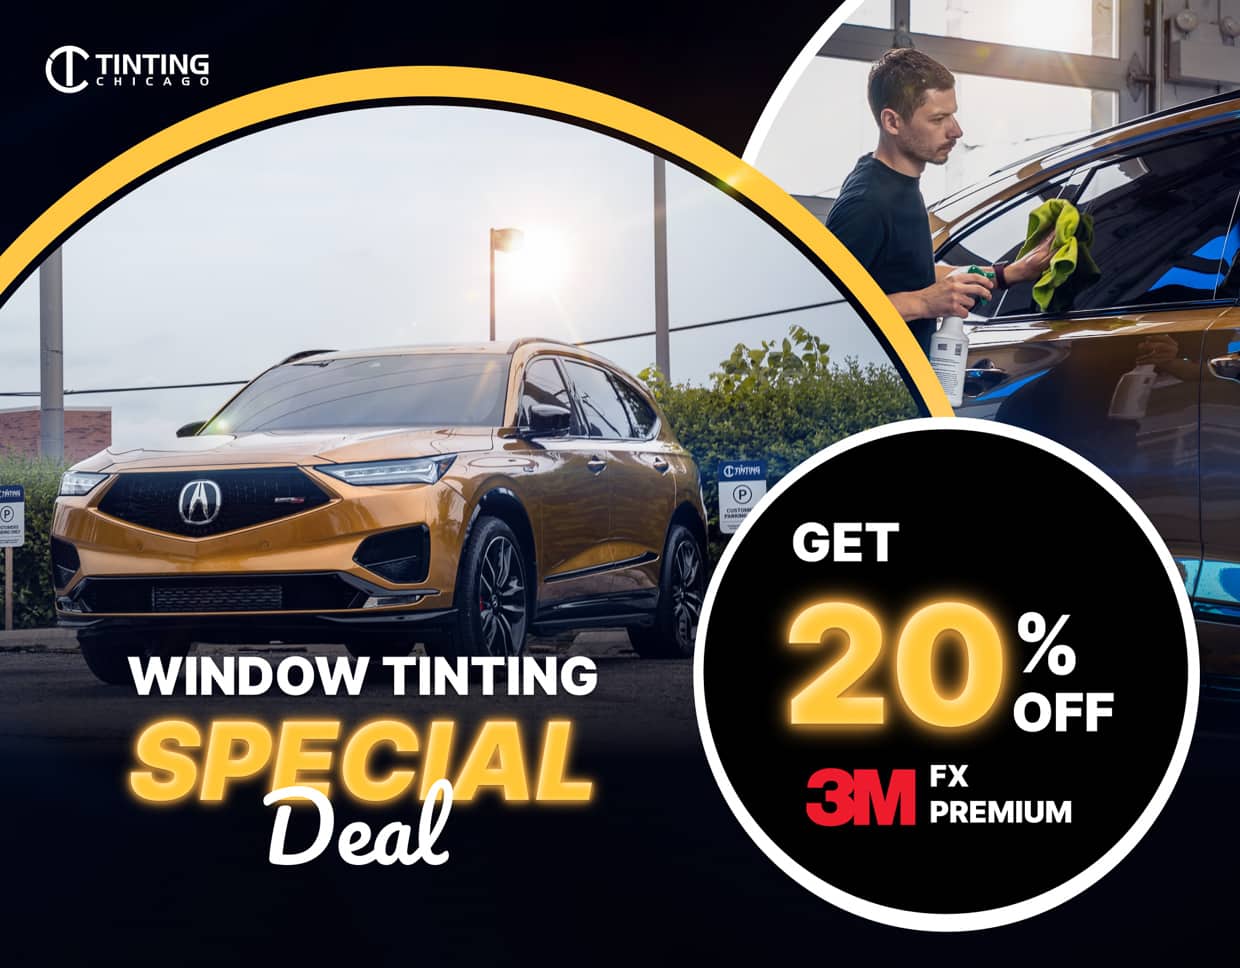 Special Deal - 20% OFF for 3M FX Premium 